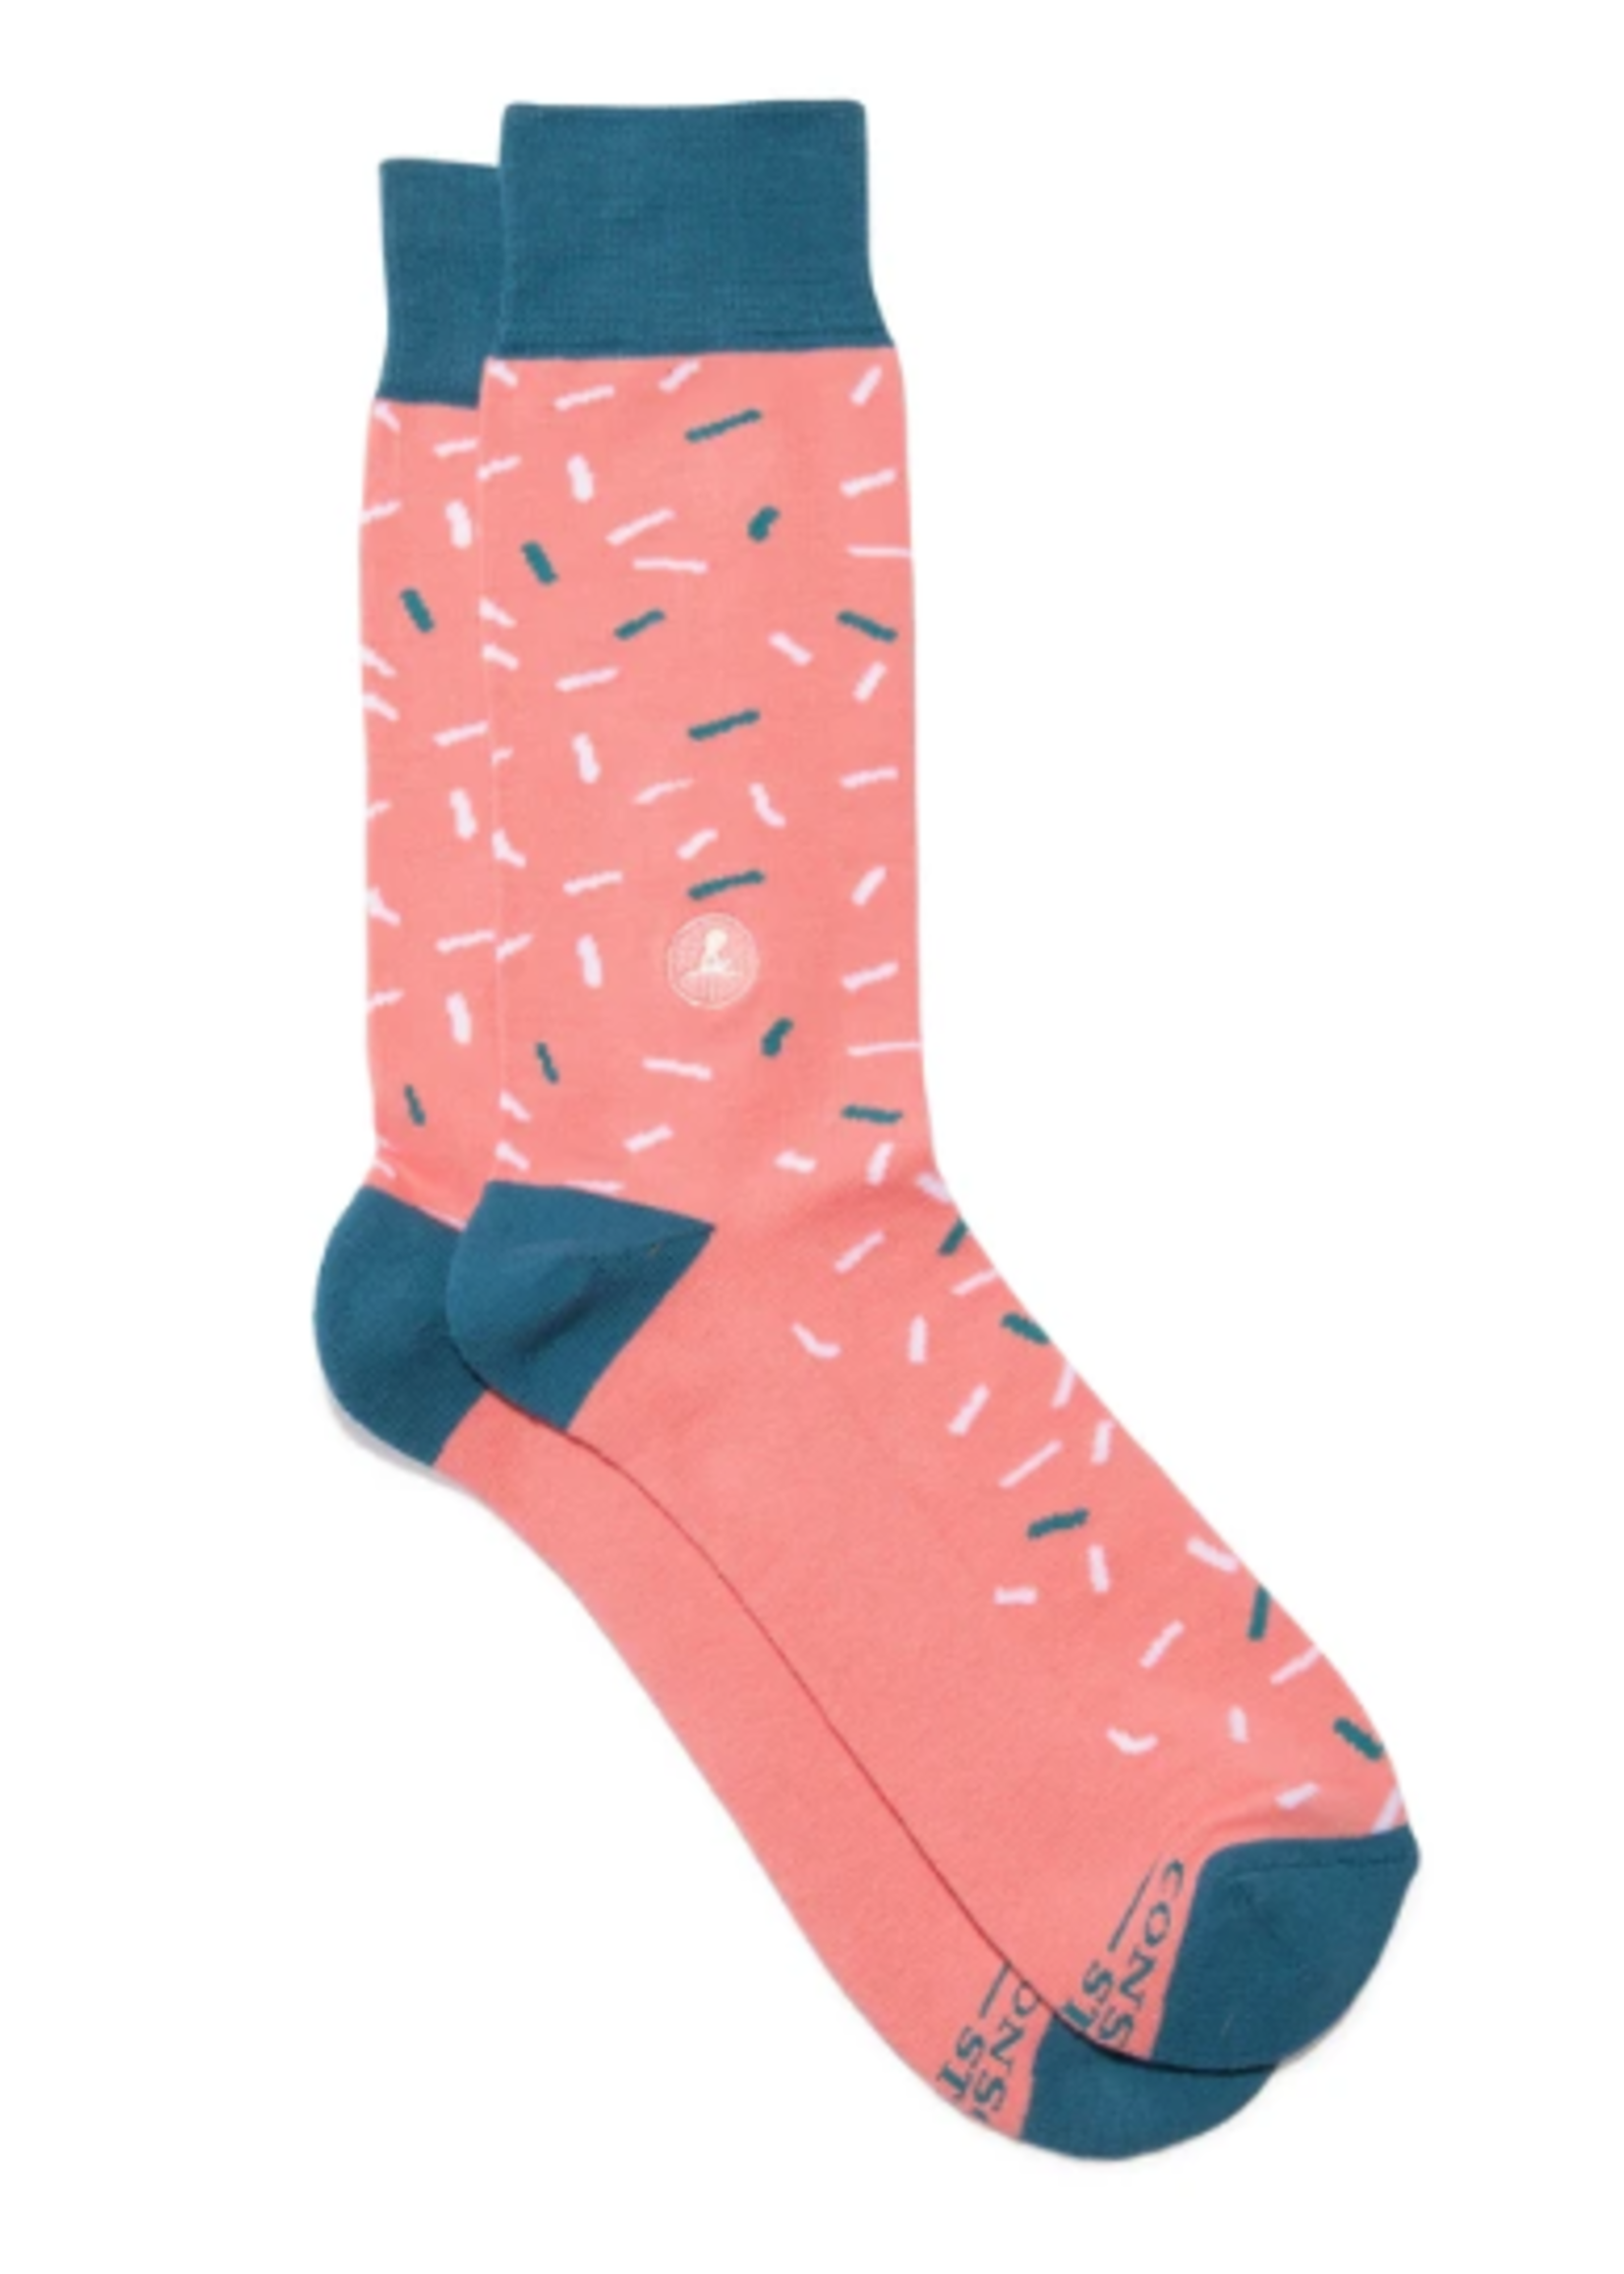 Socks That Find a Cure-Sprinkles